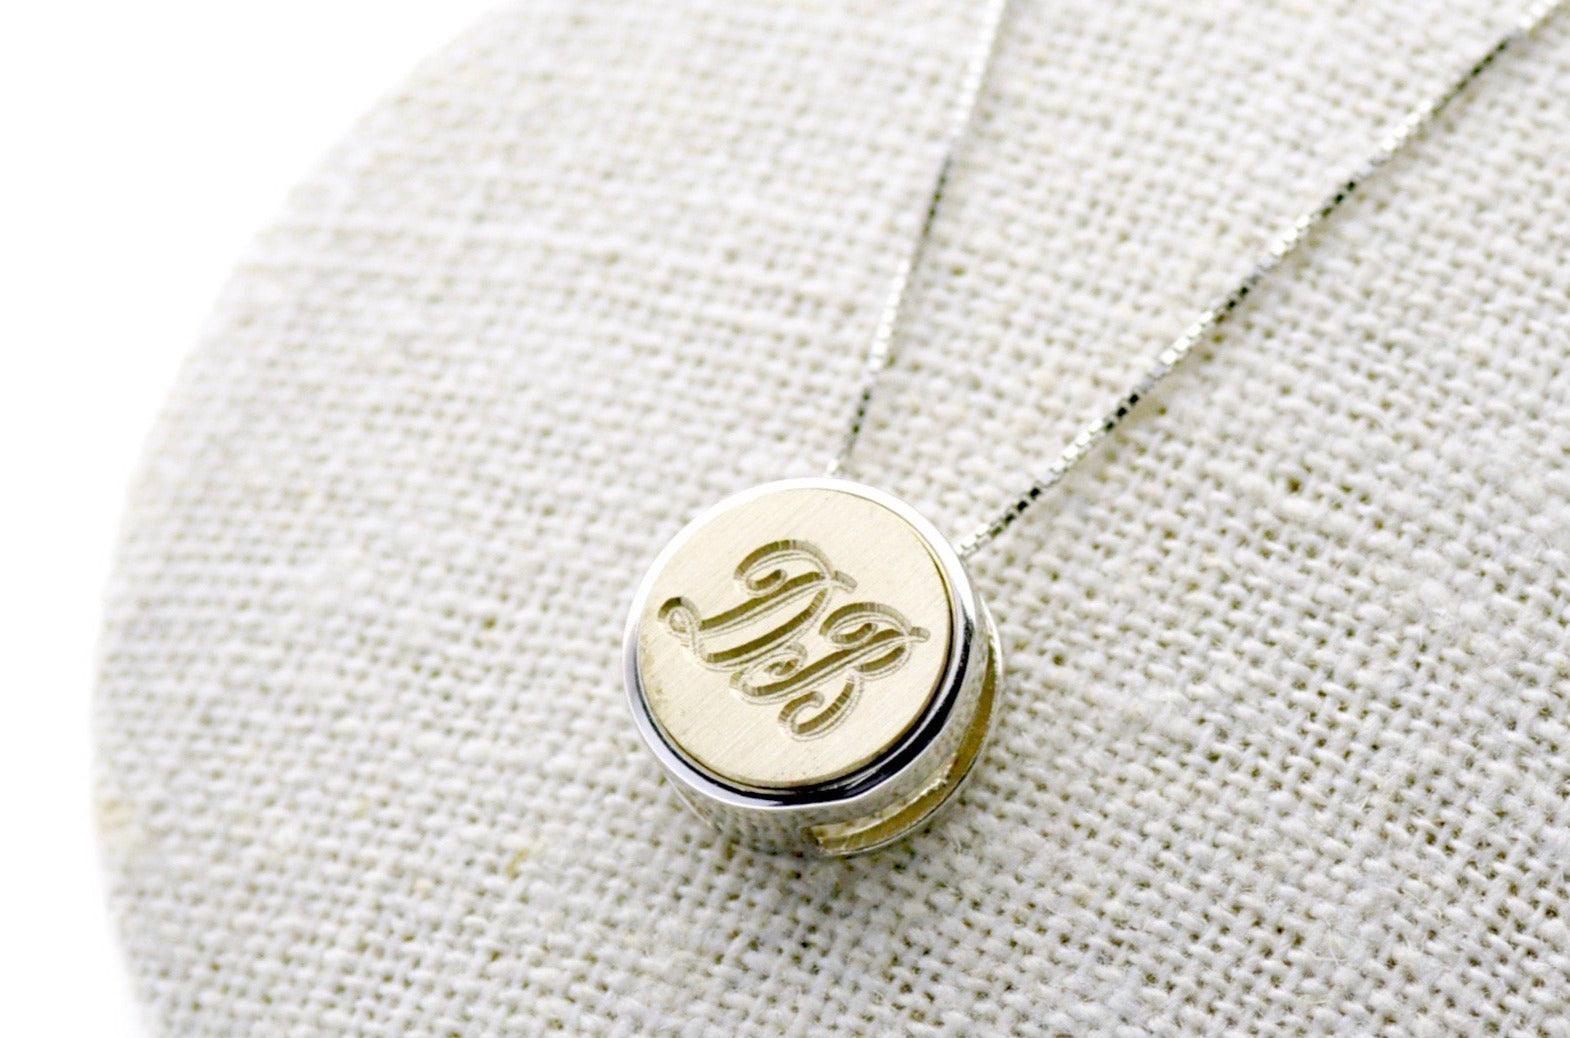 Line Double Initial Floating Signet Necklace - Backtozero B20 - 12mm, 12mm necklace, 2 initials, 2initials, bead, brass, charm, double, Double Initials, floating, minimal, minimalnecklace, necklace, Personalized, signet, signet necklace, silver, Two initials, Wedding